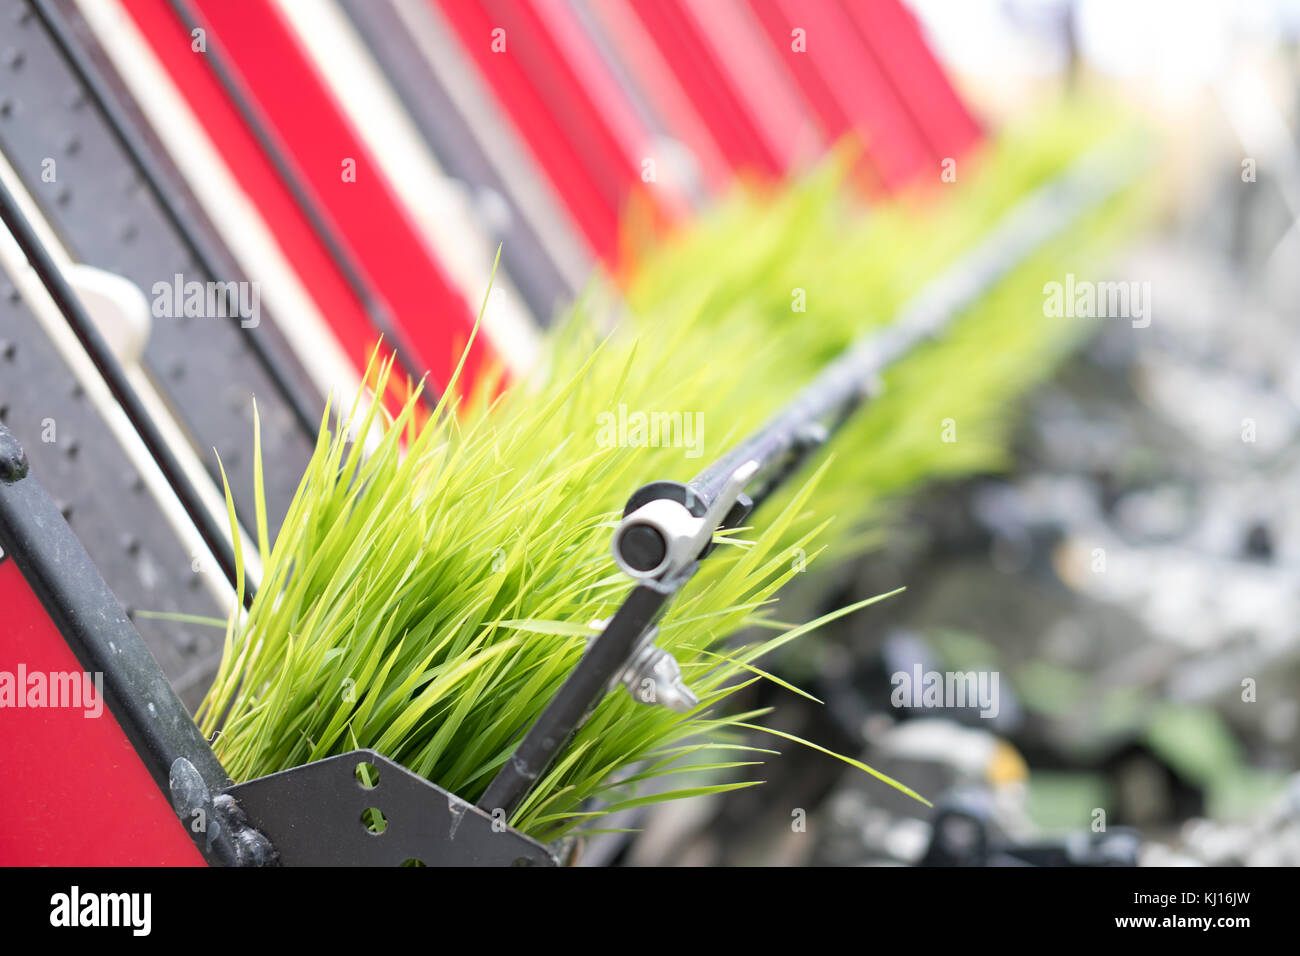 rice planting machine. Transplant young rice seedling on paddy field by transplanter. Stock Photo